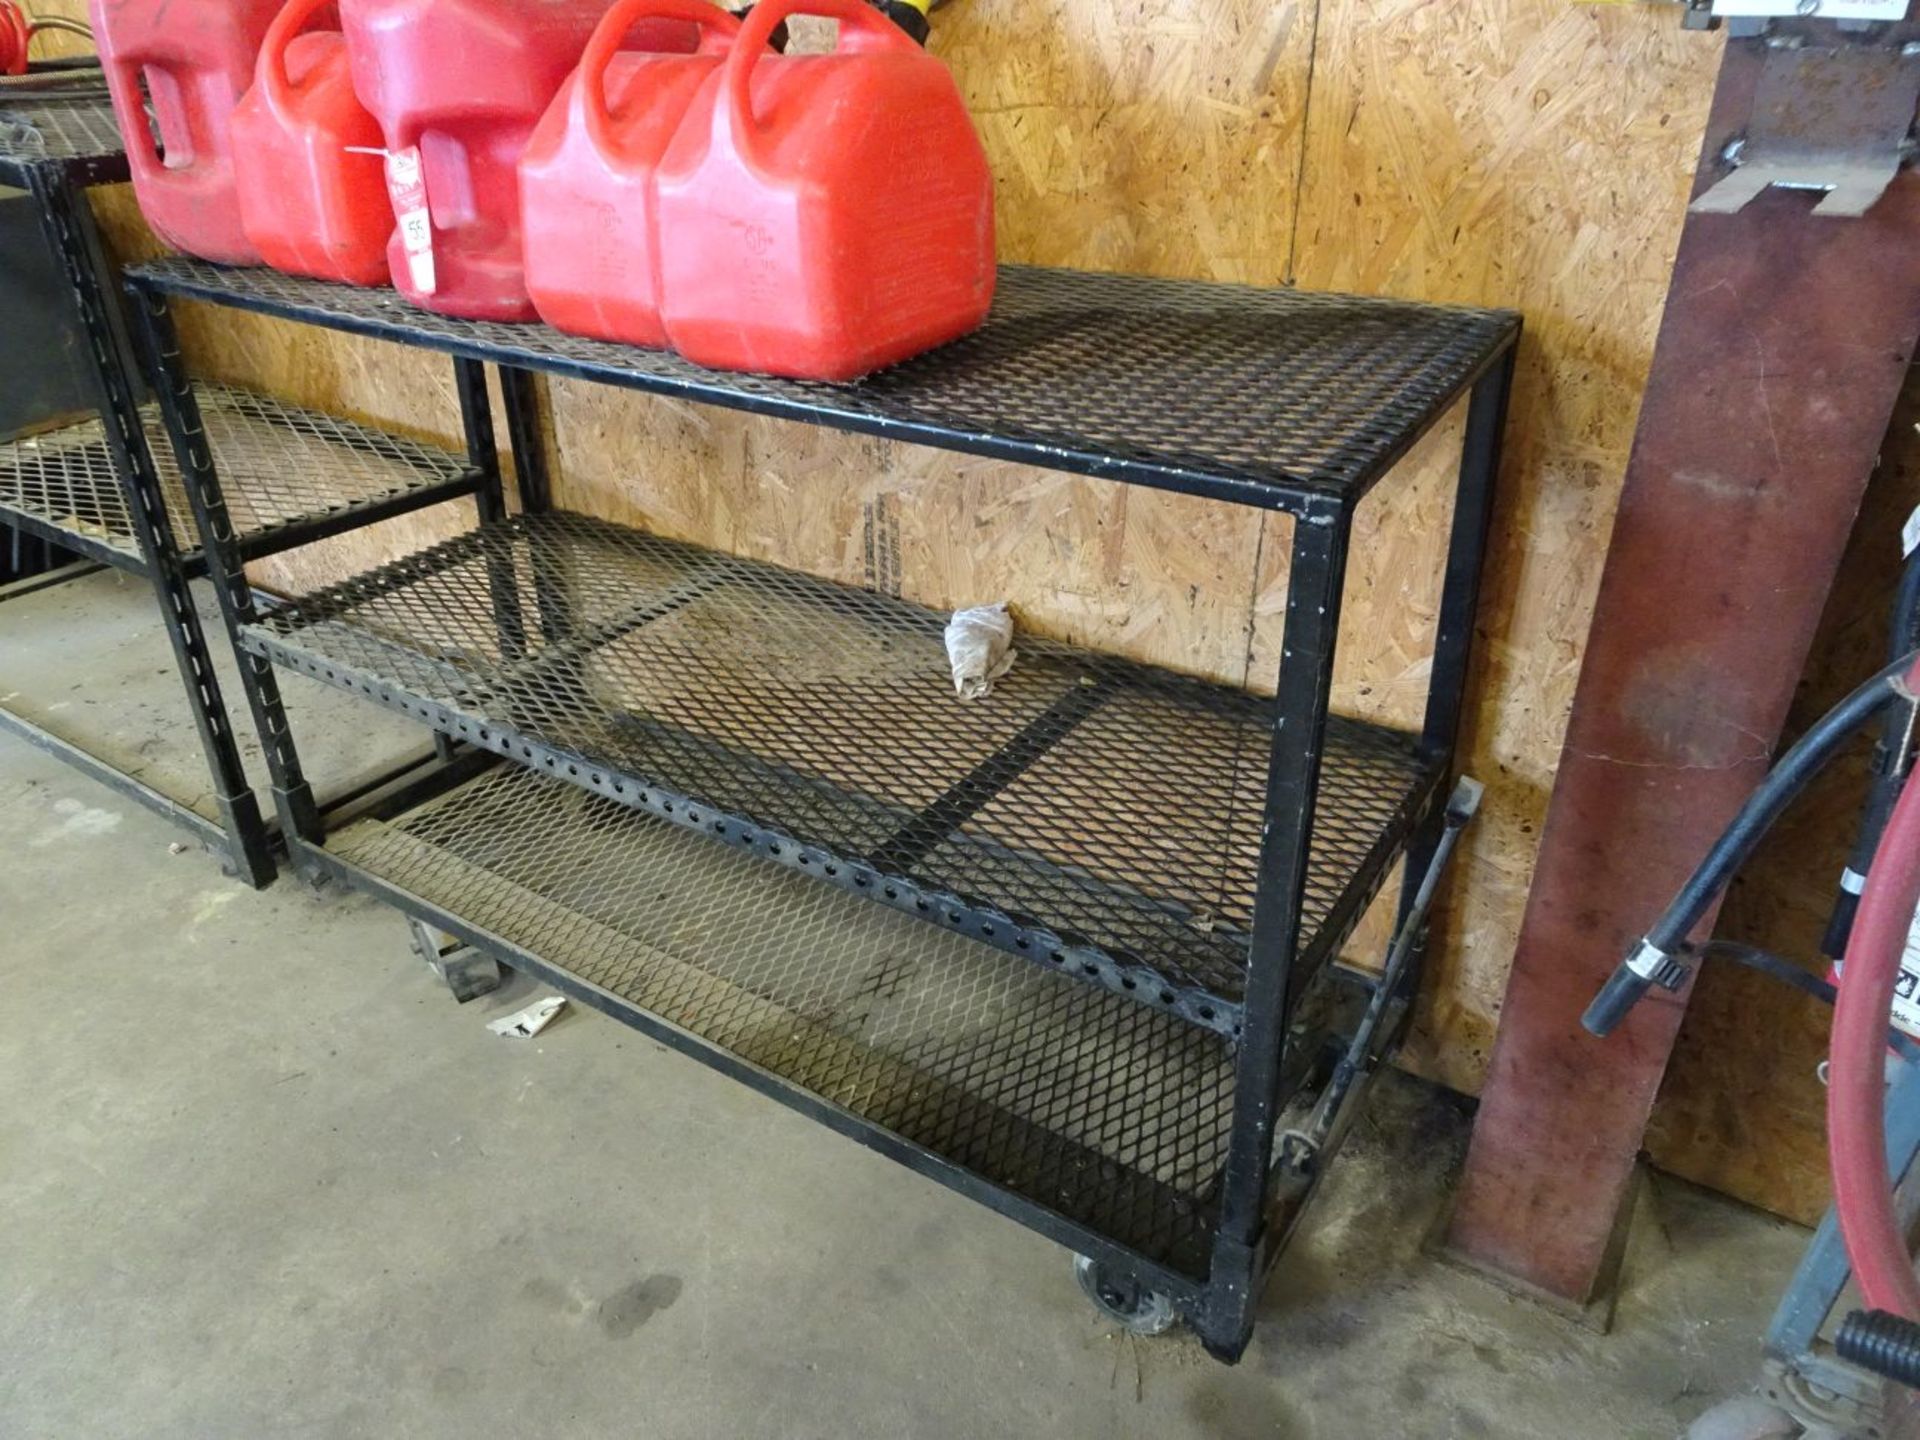 ASSORTED ITEMS, INCLUDES (5) GAS CANS, VARIOUS BELTS, PARTS ORGANIZERS, AND (2) METAL RACKS - Image 2 of 5